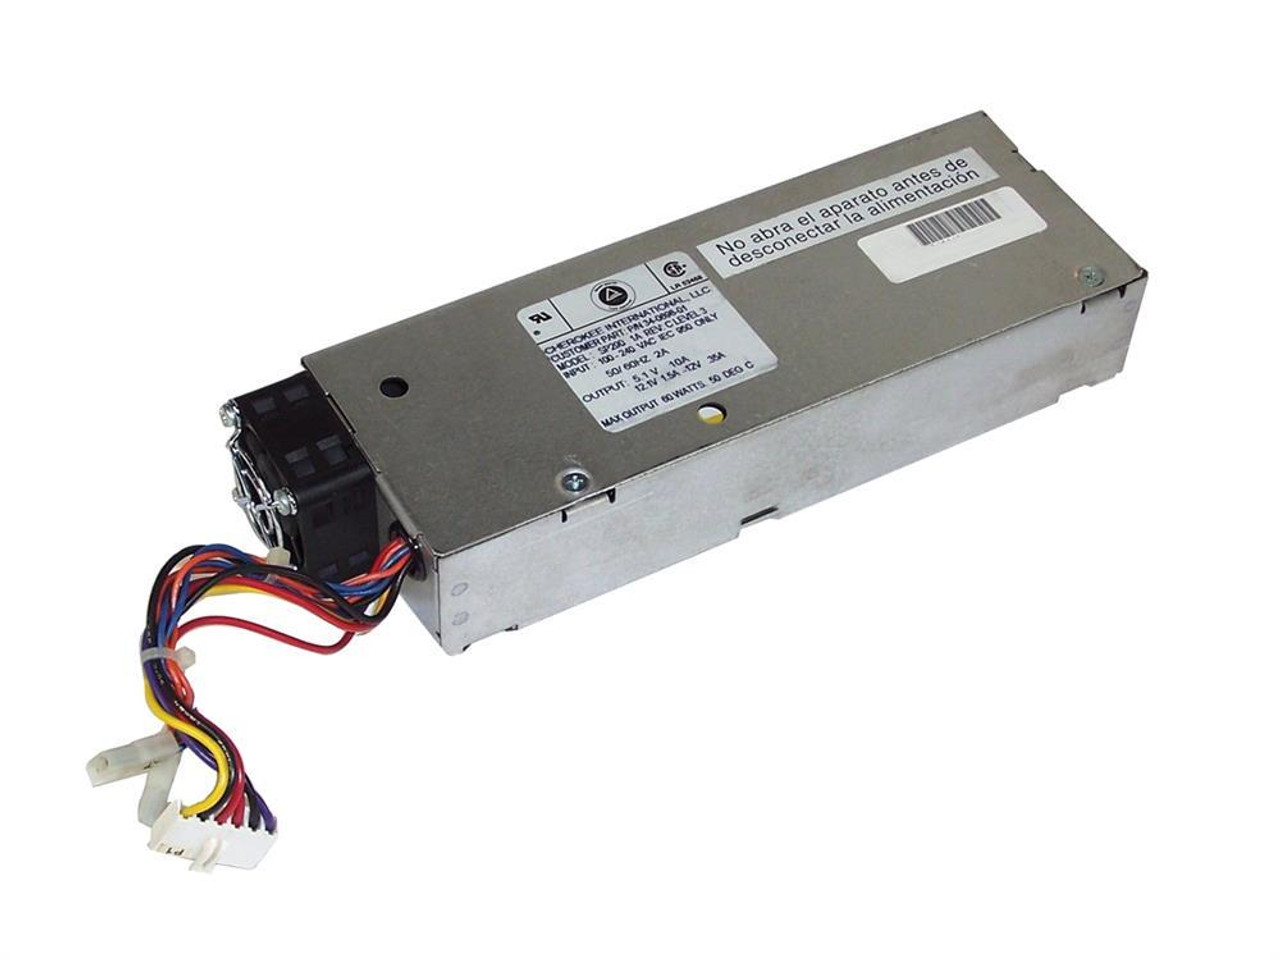 PWR-3620-DC Cisco DC Power Supply for 3620 (Refurbished)